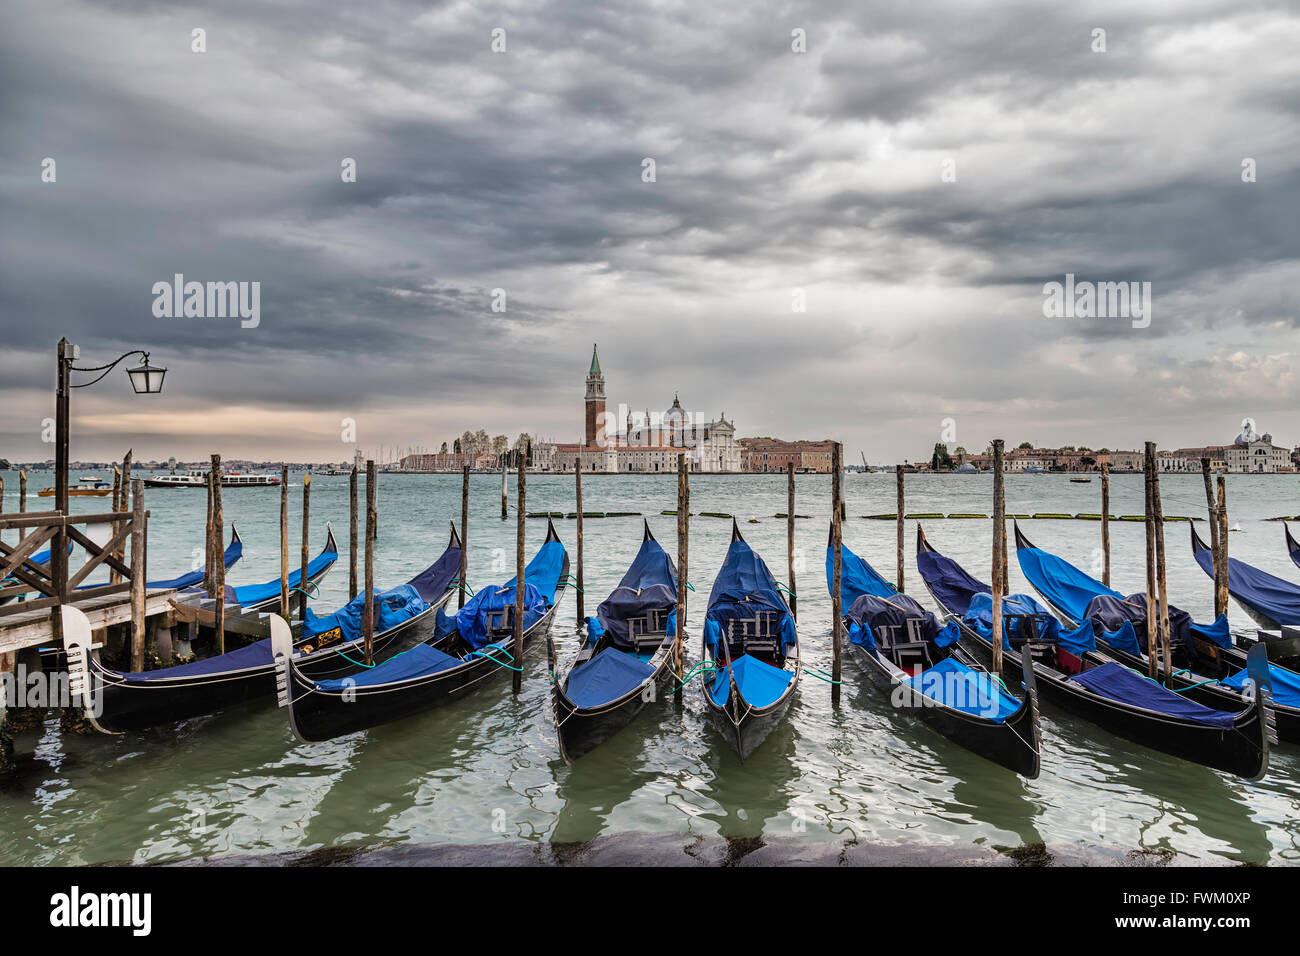 Dramatic view of Venice with row of gondolas docked to the poles on the Grand Canal around Piazza San Marco in Venice, Italy Stock Photo